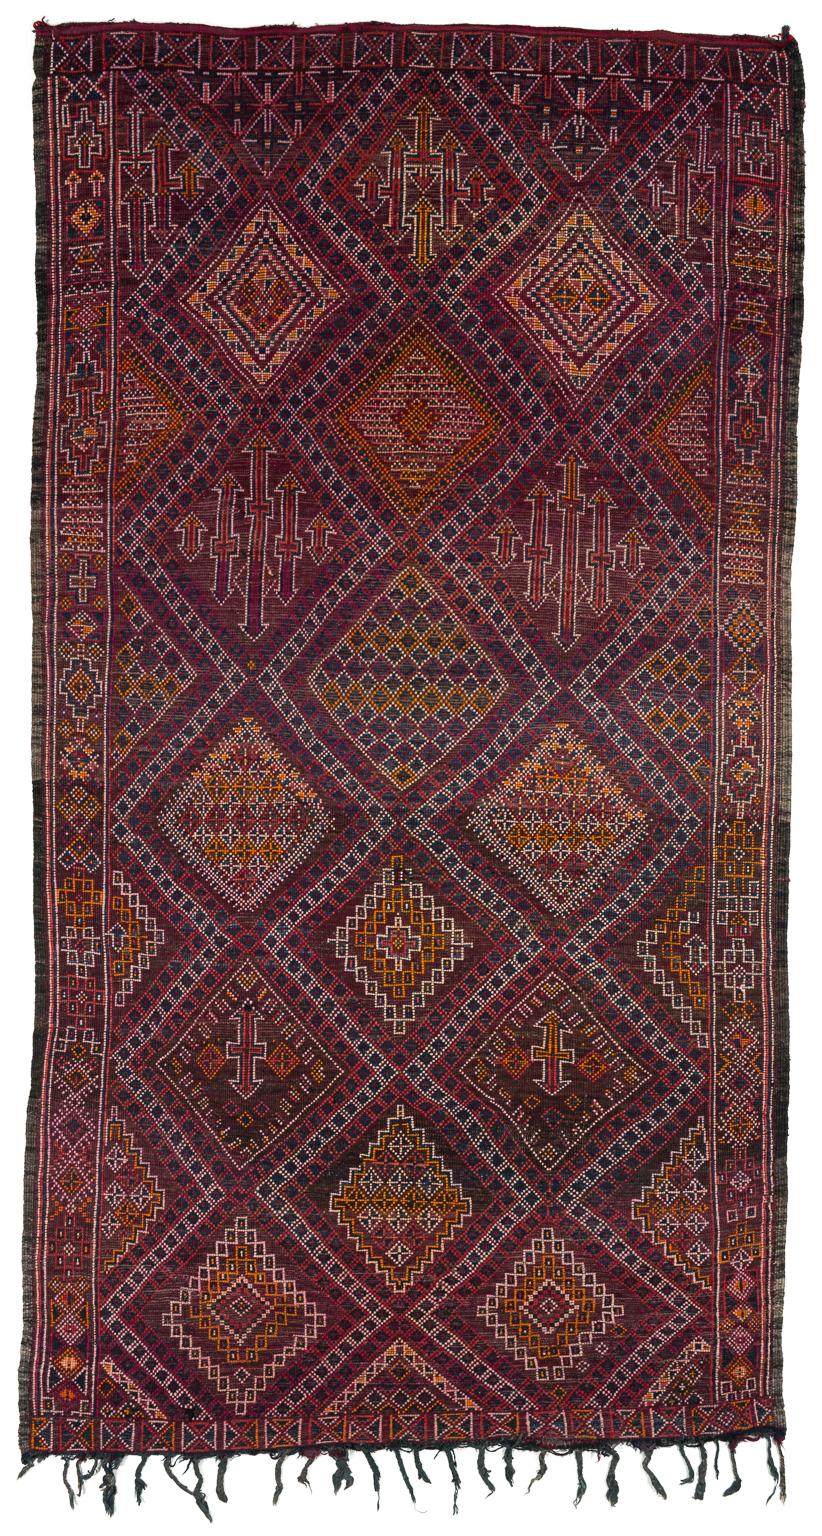 This Moroccan rug is in perfect condition, very soft wool, with lots of deep indigo blue and reds and oranges. Like smoldering coals burning in a night sky or a stained glass window. A truly mystic piece. Measures: 6' x 10'10''.